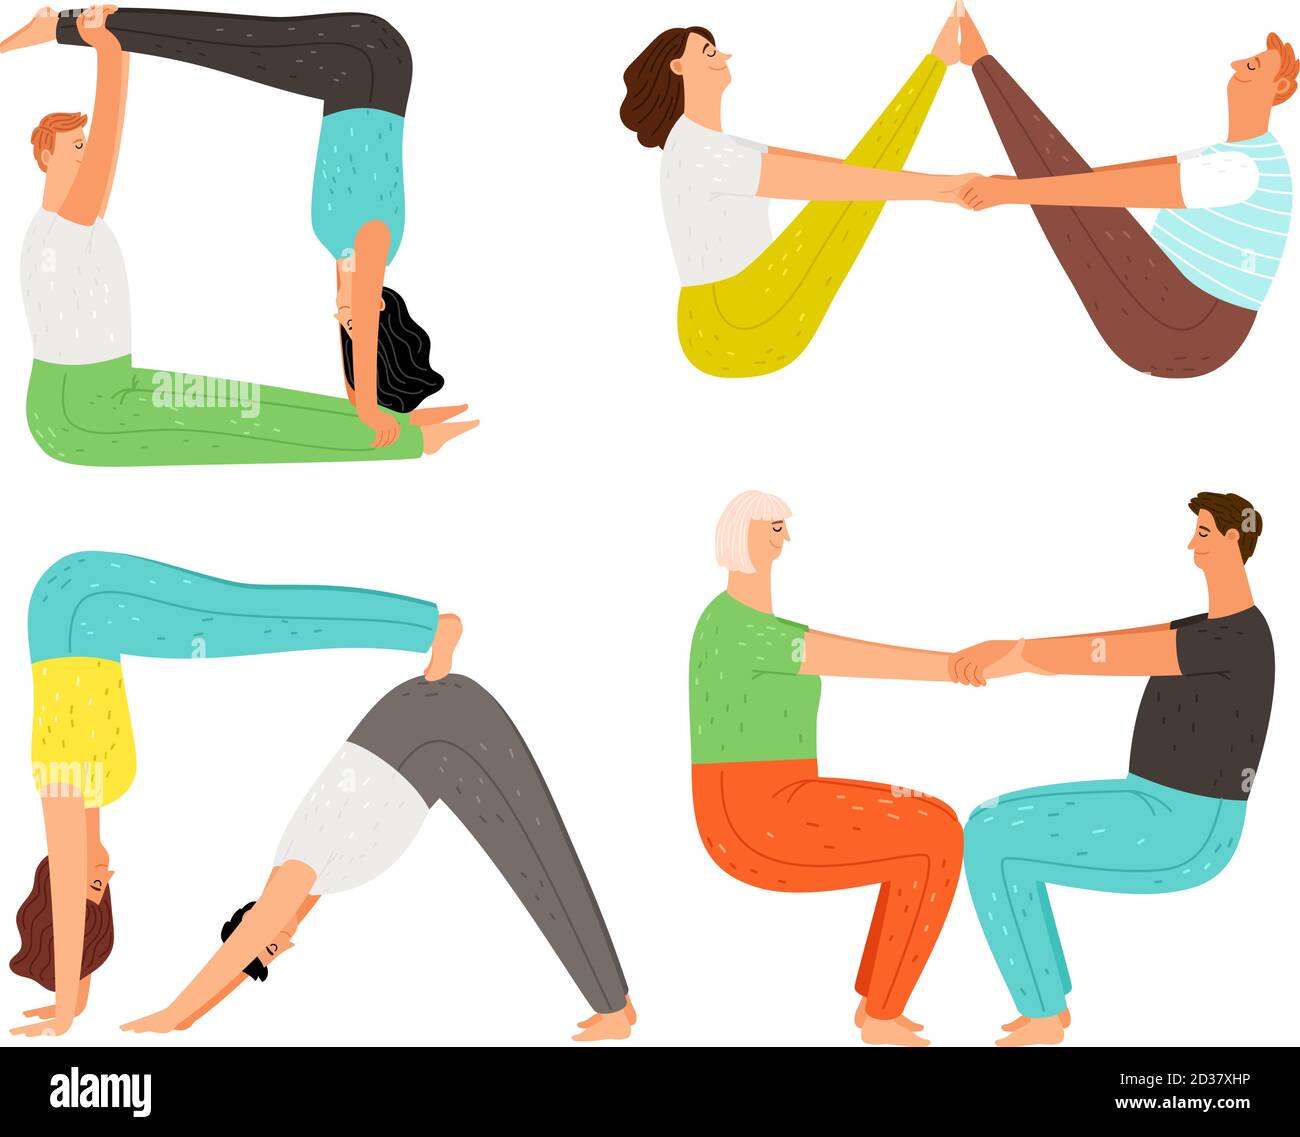 12 Couples Yoga Poses to Strengthen Your Relationship - PureWow